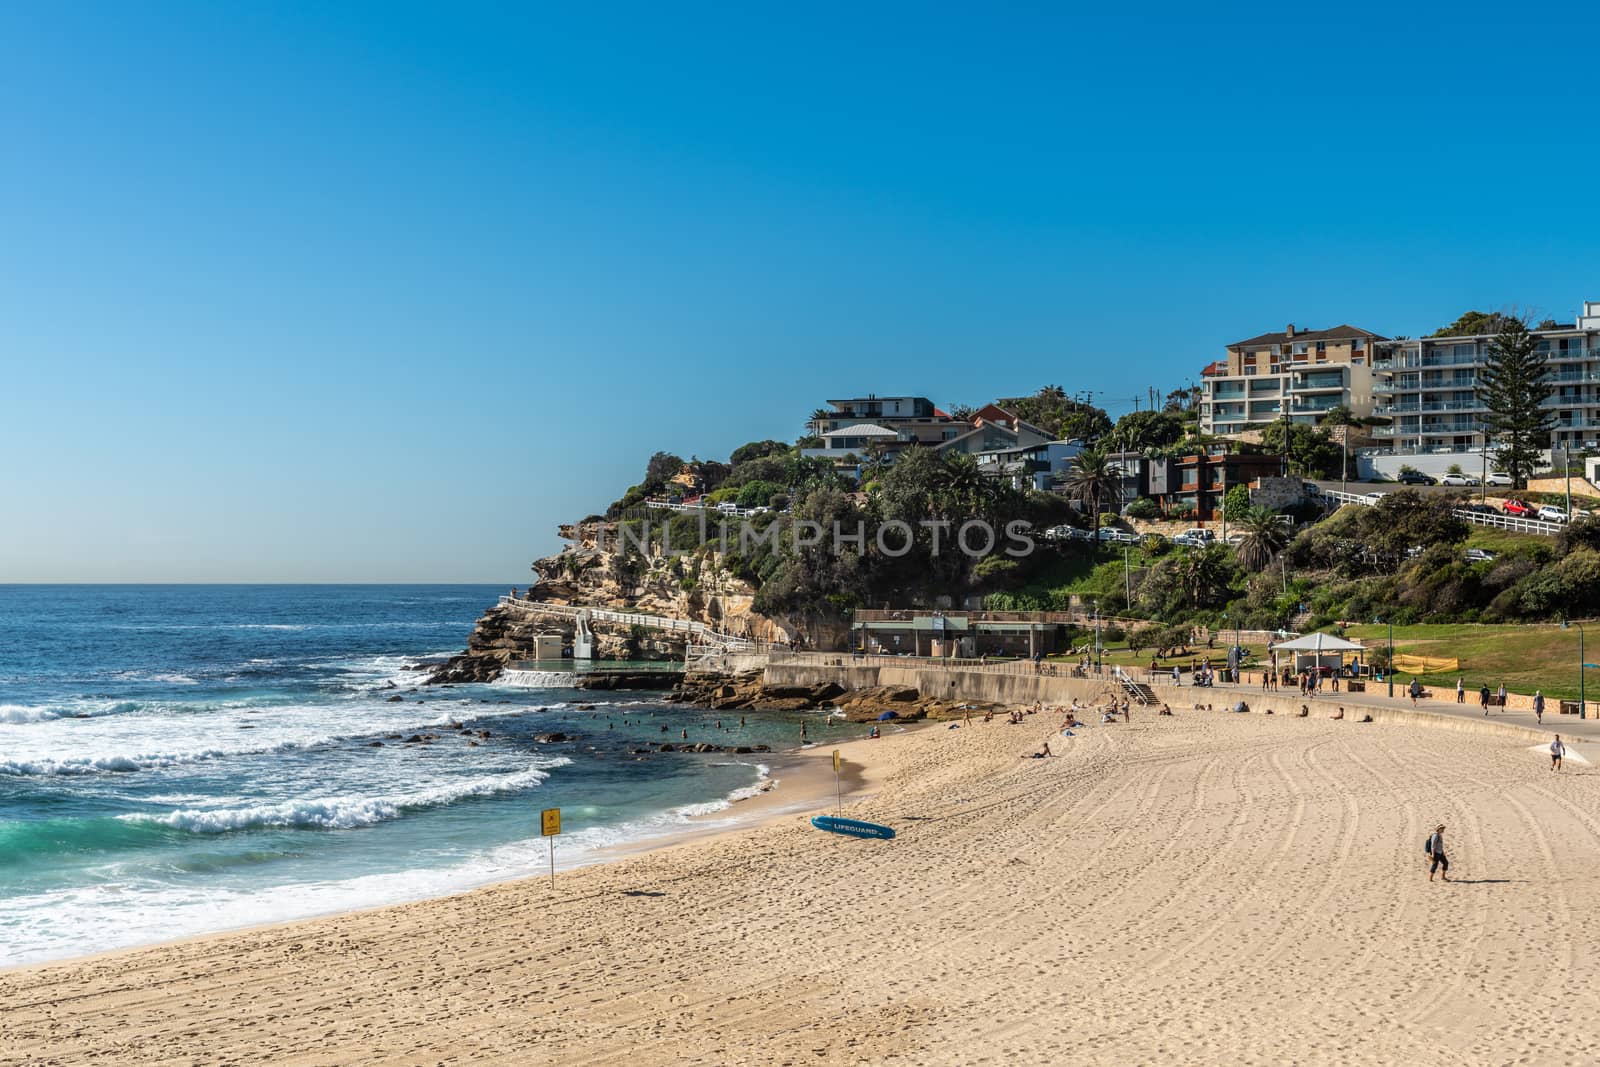 Sydney, Australia - February 11, 2019: Bronte Beach, sea water, yellow sand, green park under blue sky seen from North shore.. Band with housing on horizon. People active.